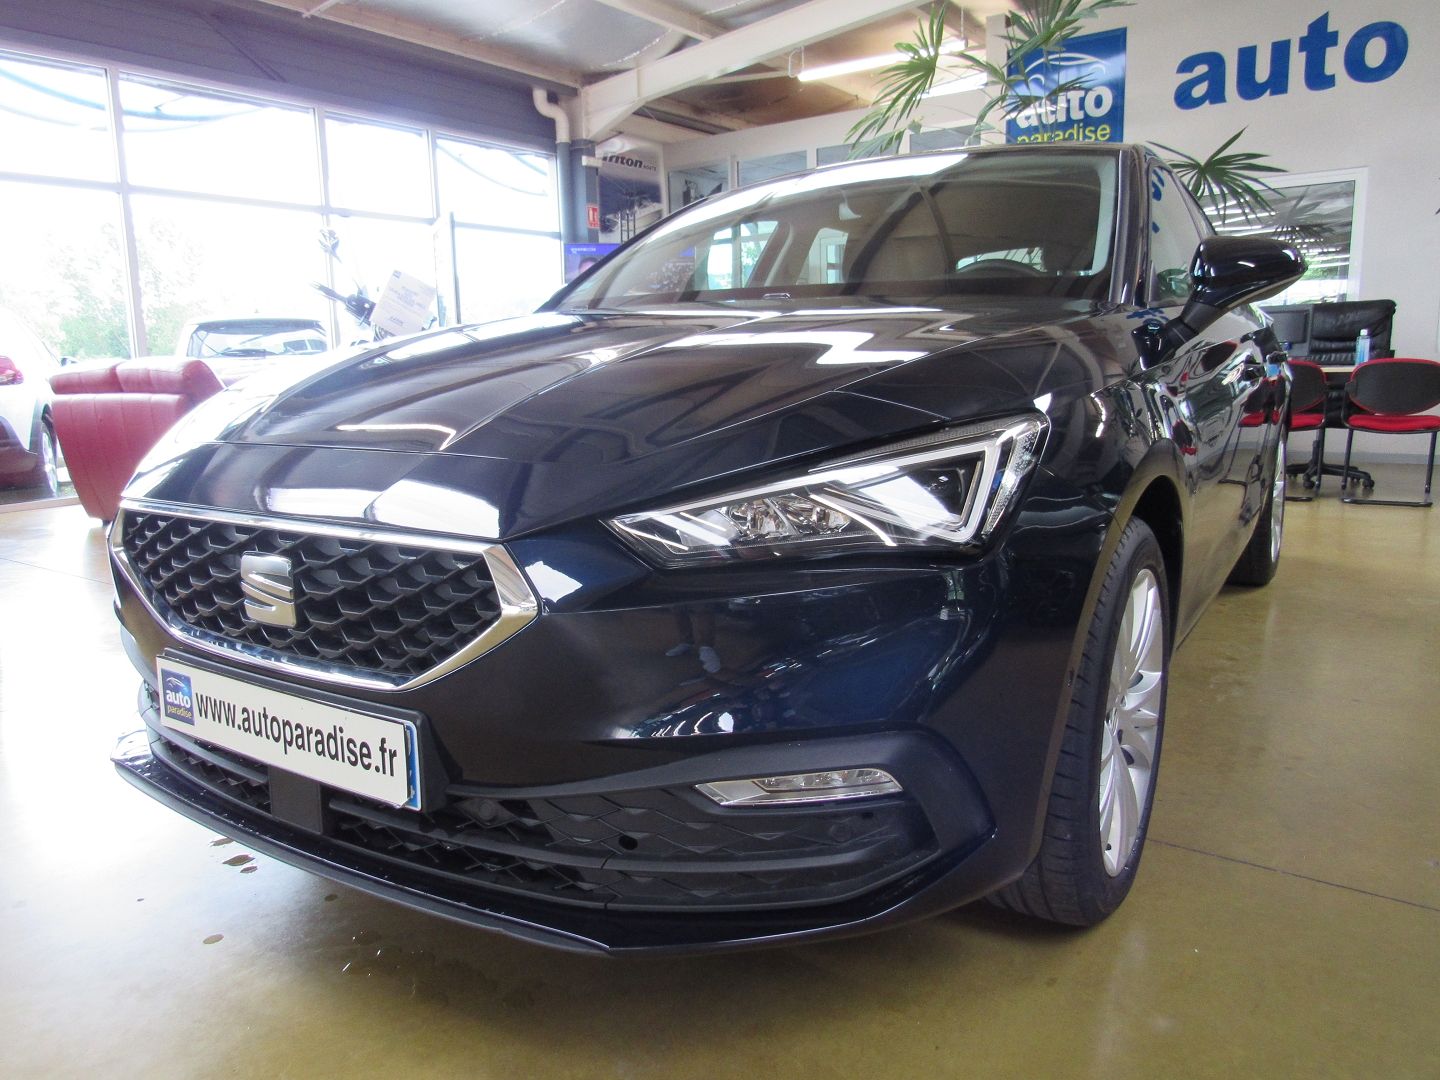 Véhicule d'occasion SEAT LEON 1.0 TSI 110 STYLE + OPTIONS